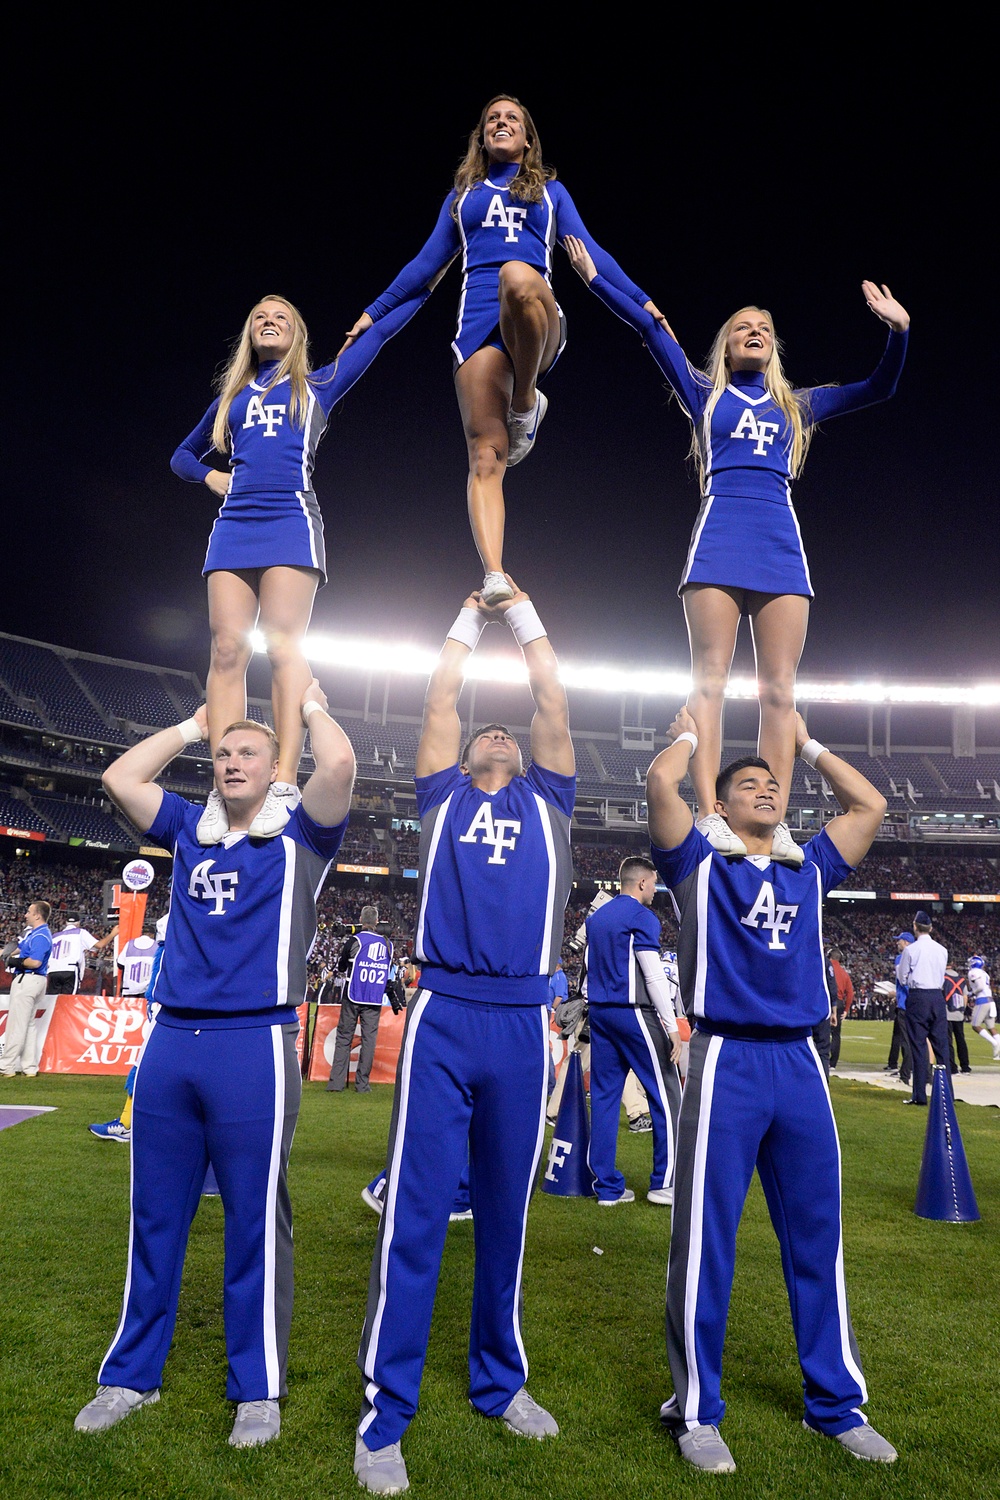 US Air Force Academy vs San Diego State University in the Mountain West Conference Championship Game